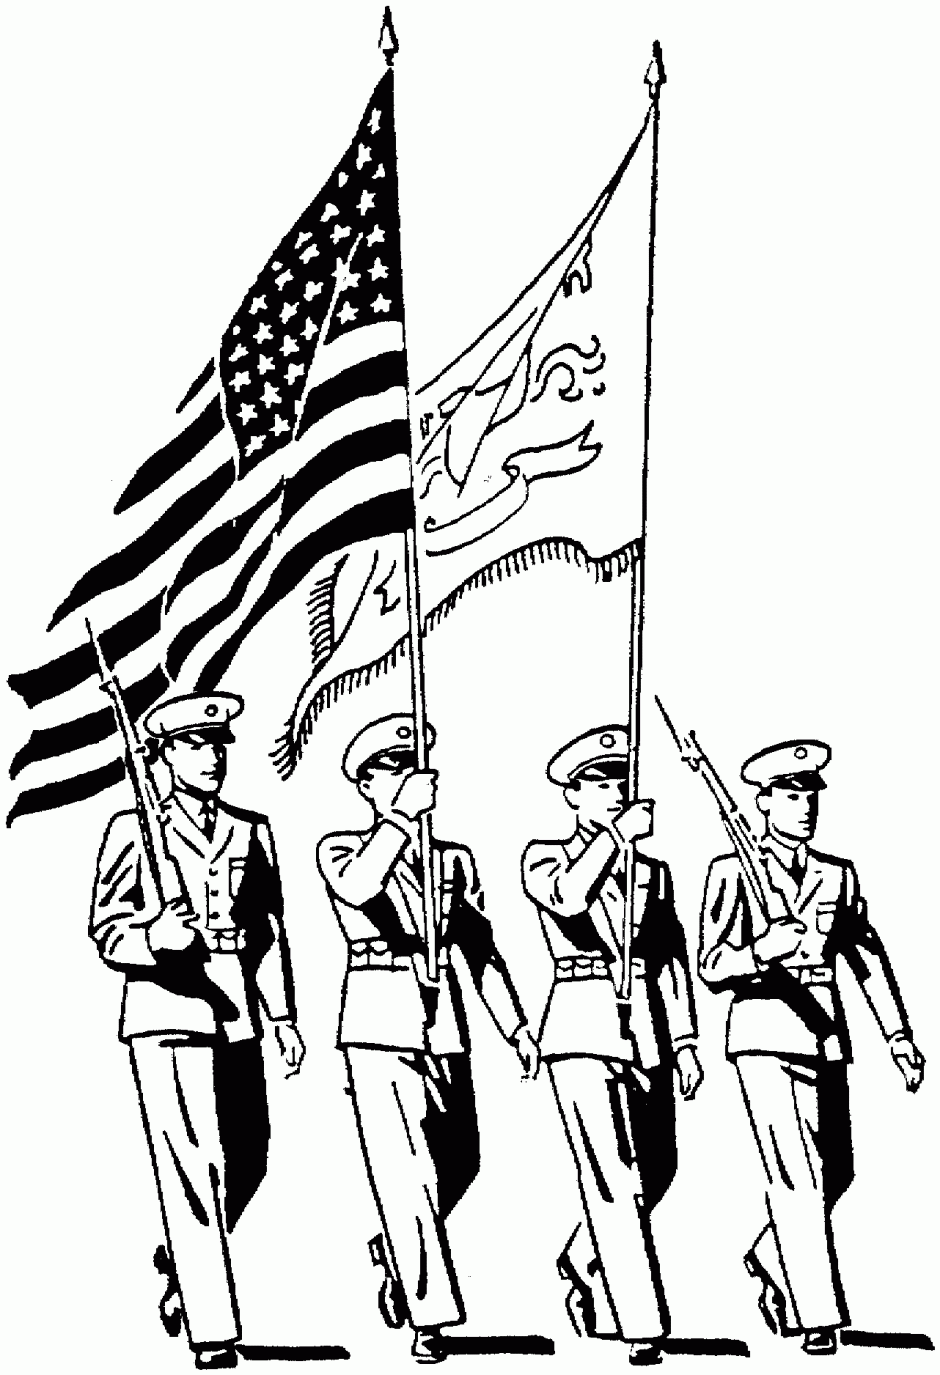 armed-forces-day-coloring-pages-coloring-home